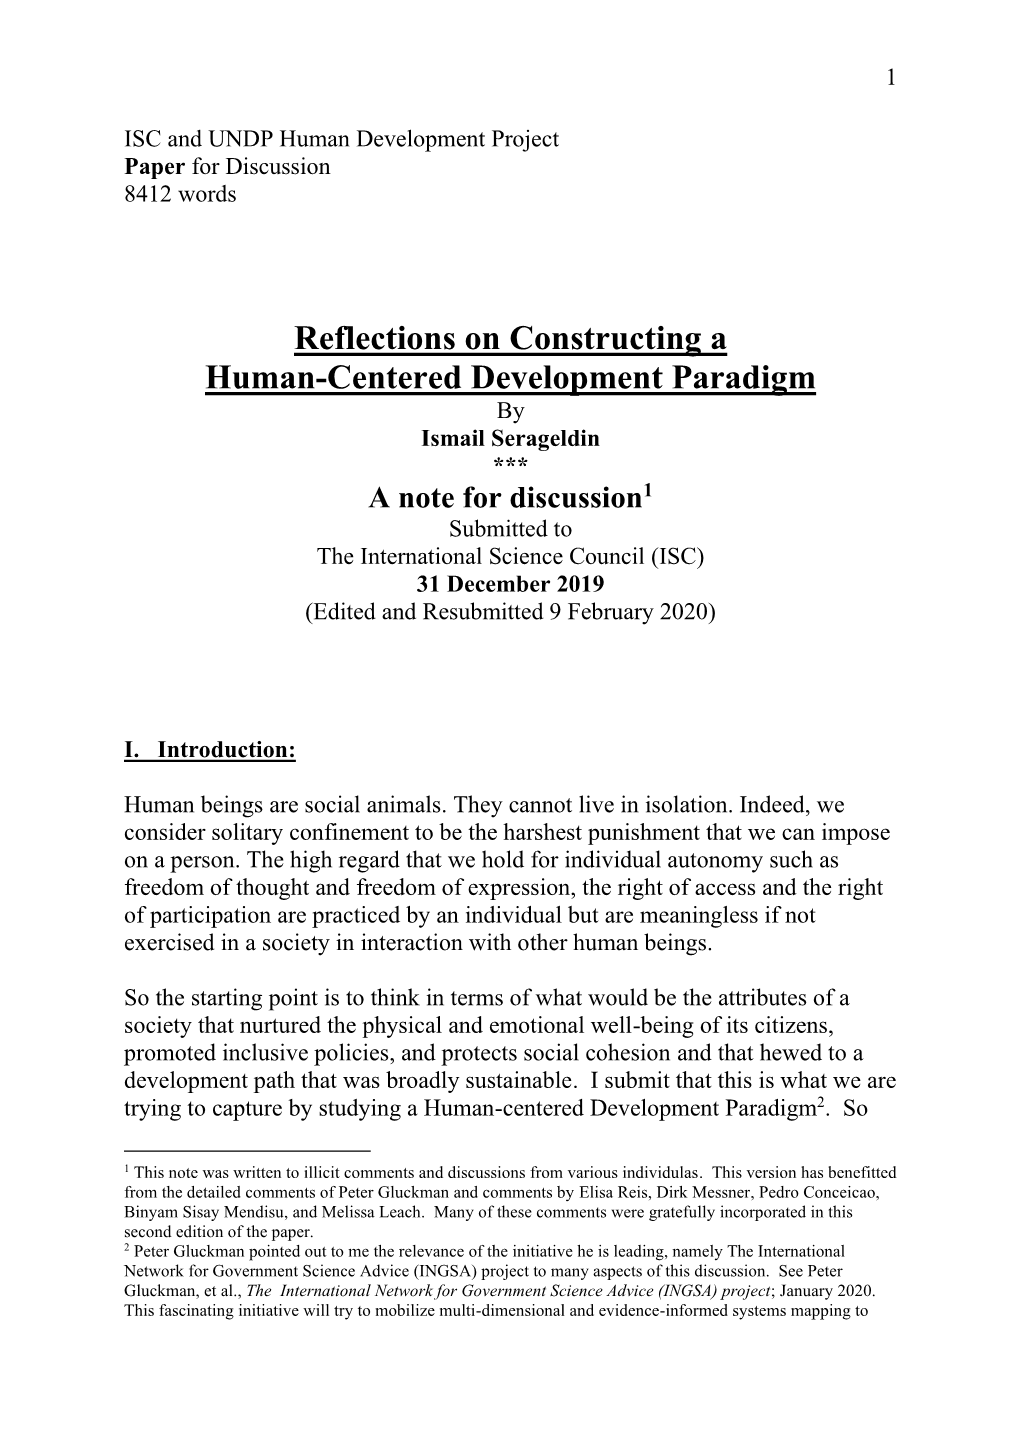 Reflections on Constructing a Human-Centered Development